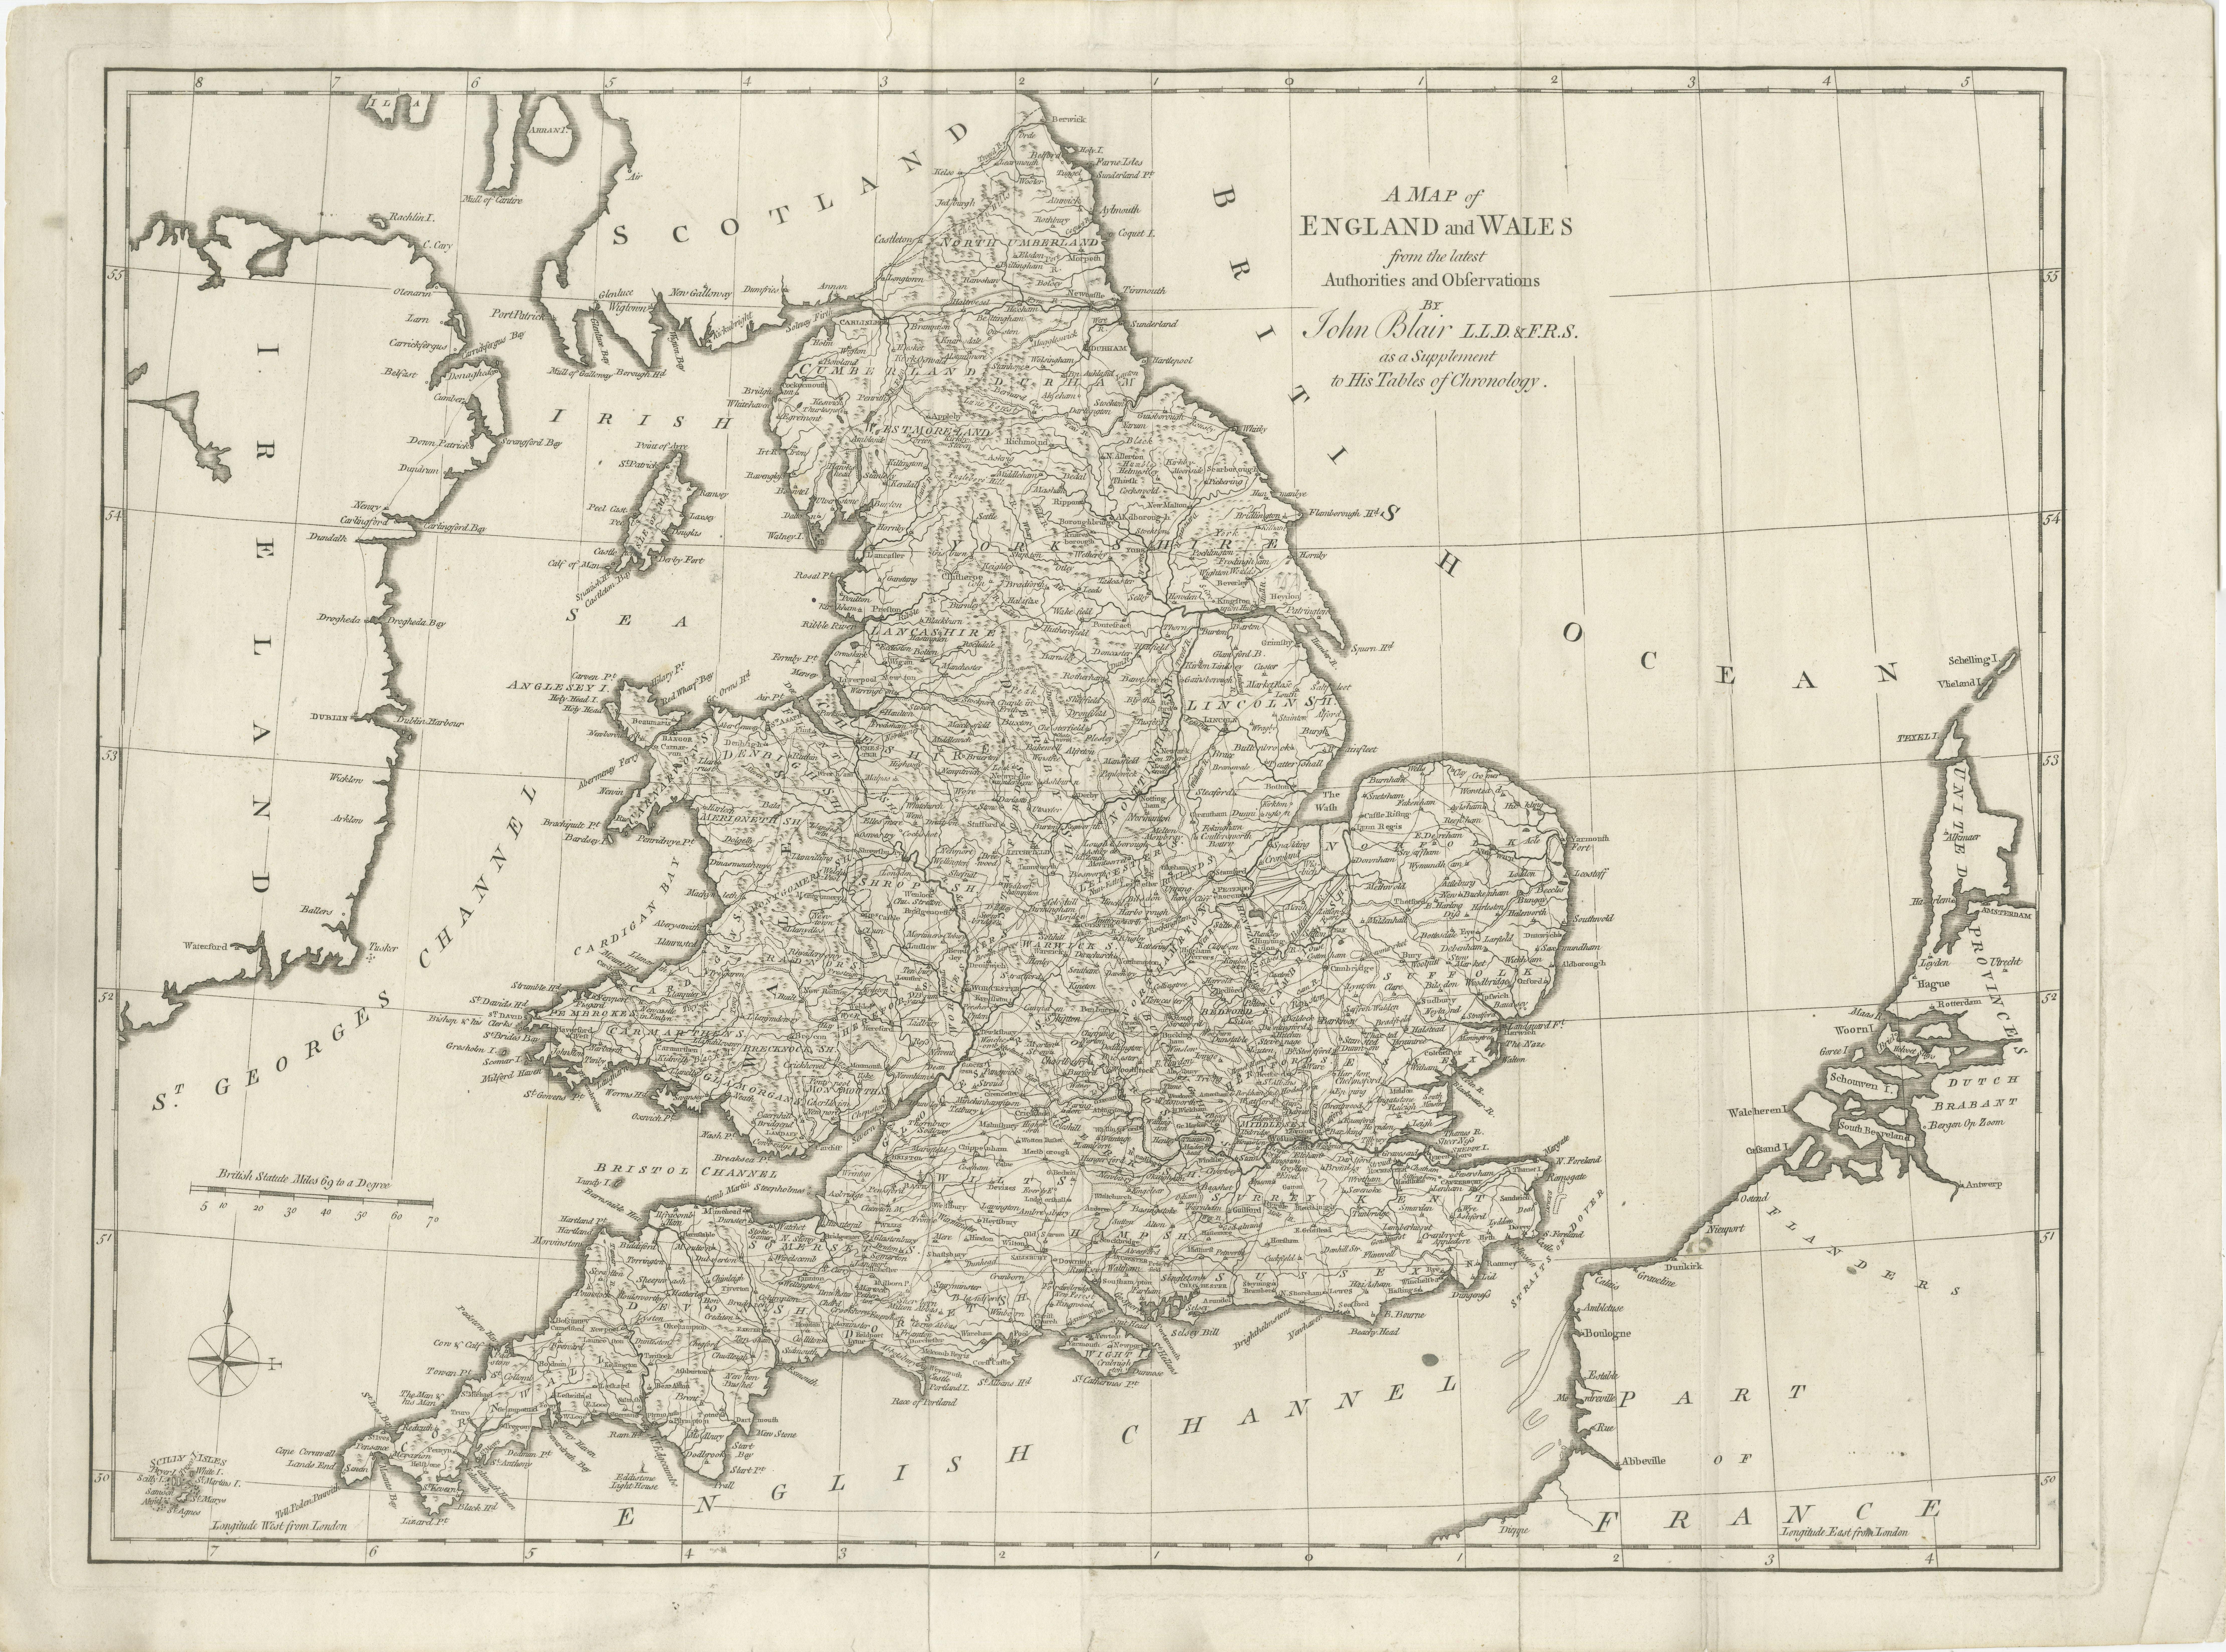 Antique map titled 'A Map of England and Wales (..)'. Large antique map of England and Wales, with part of the continental and Irish coasts. Published J. Blair, circa 1779.